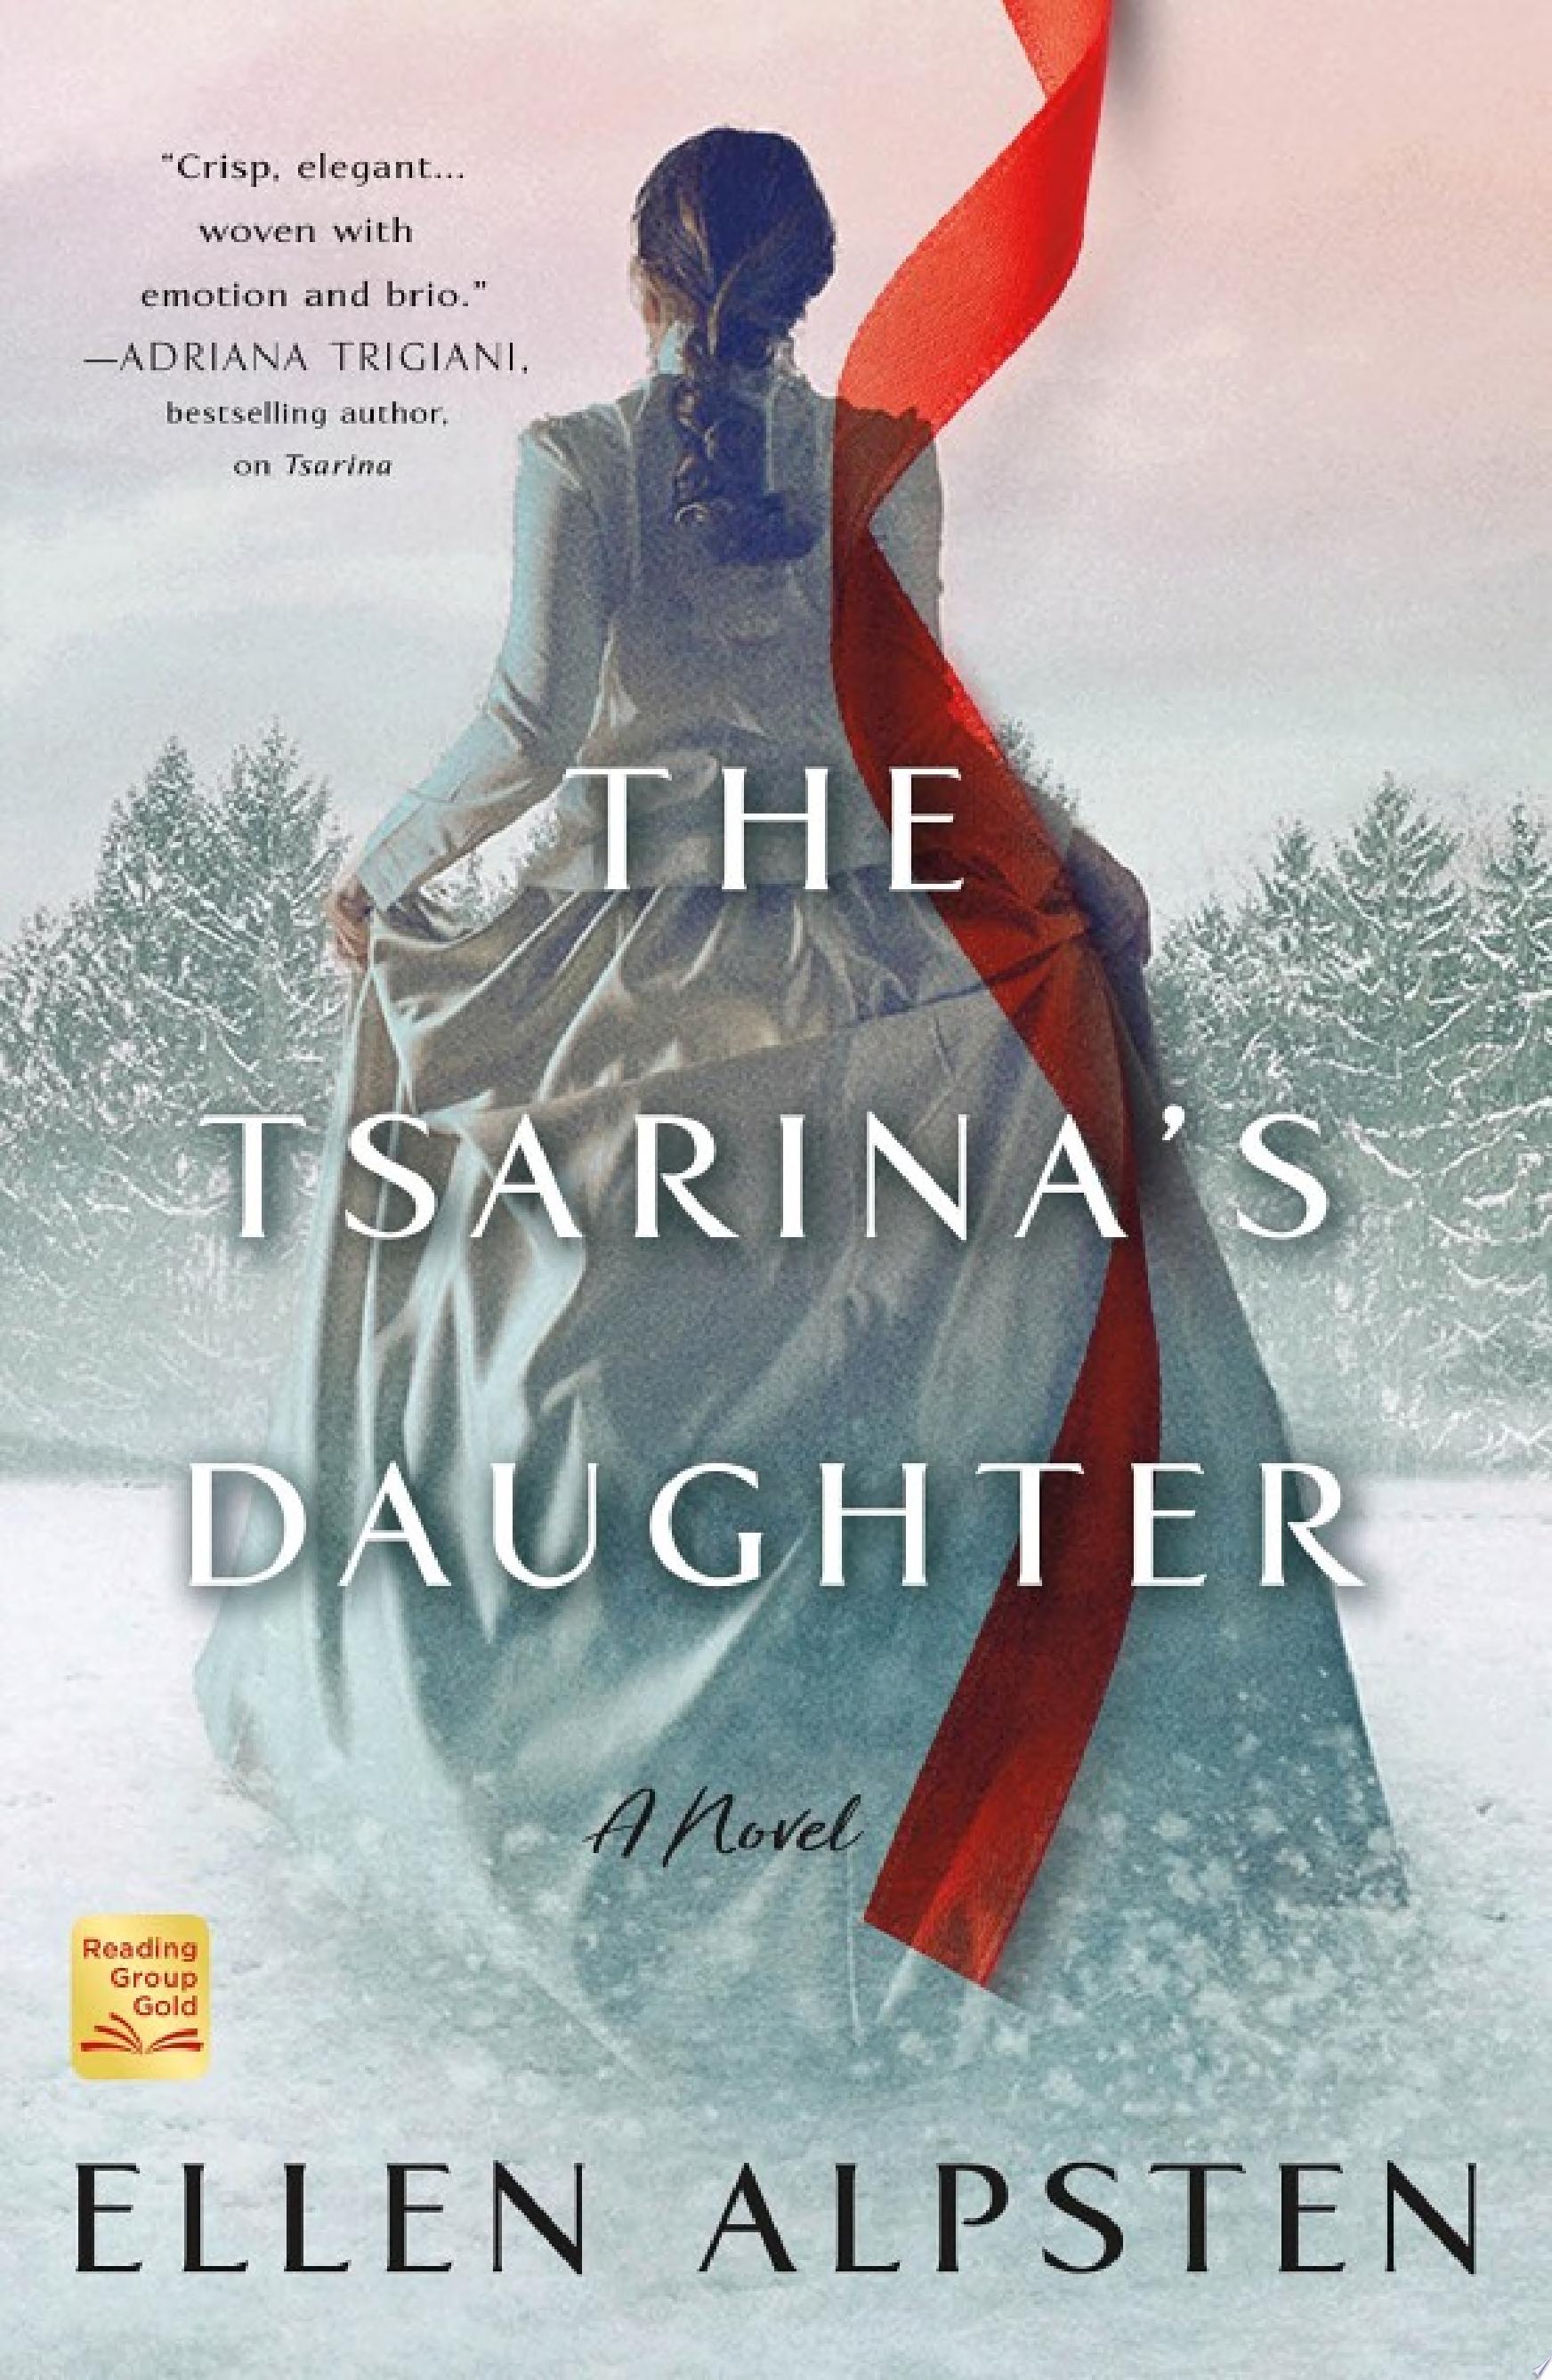 Image for "The Tsarina's Daughter"